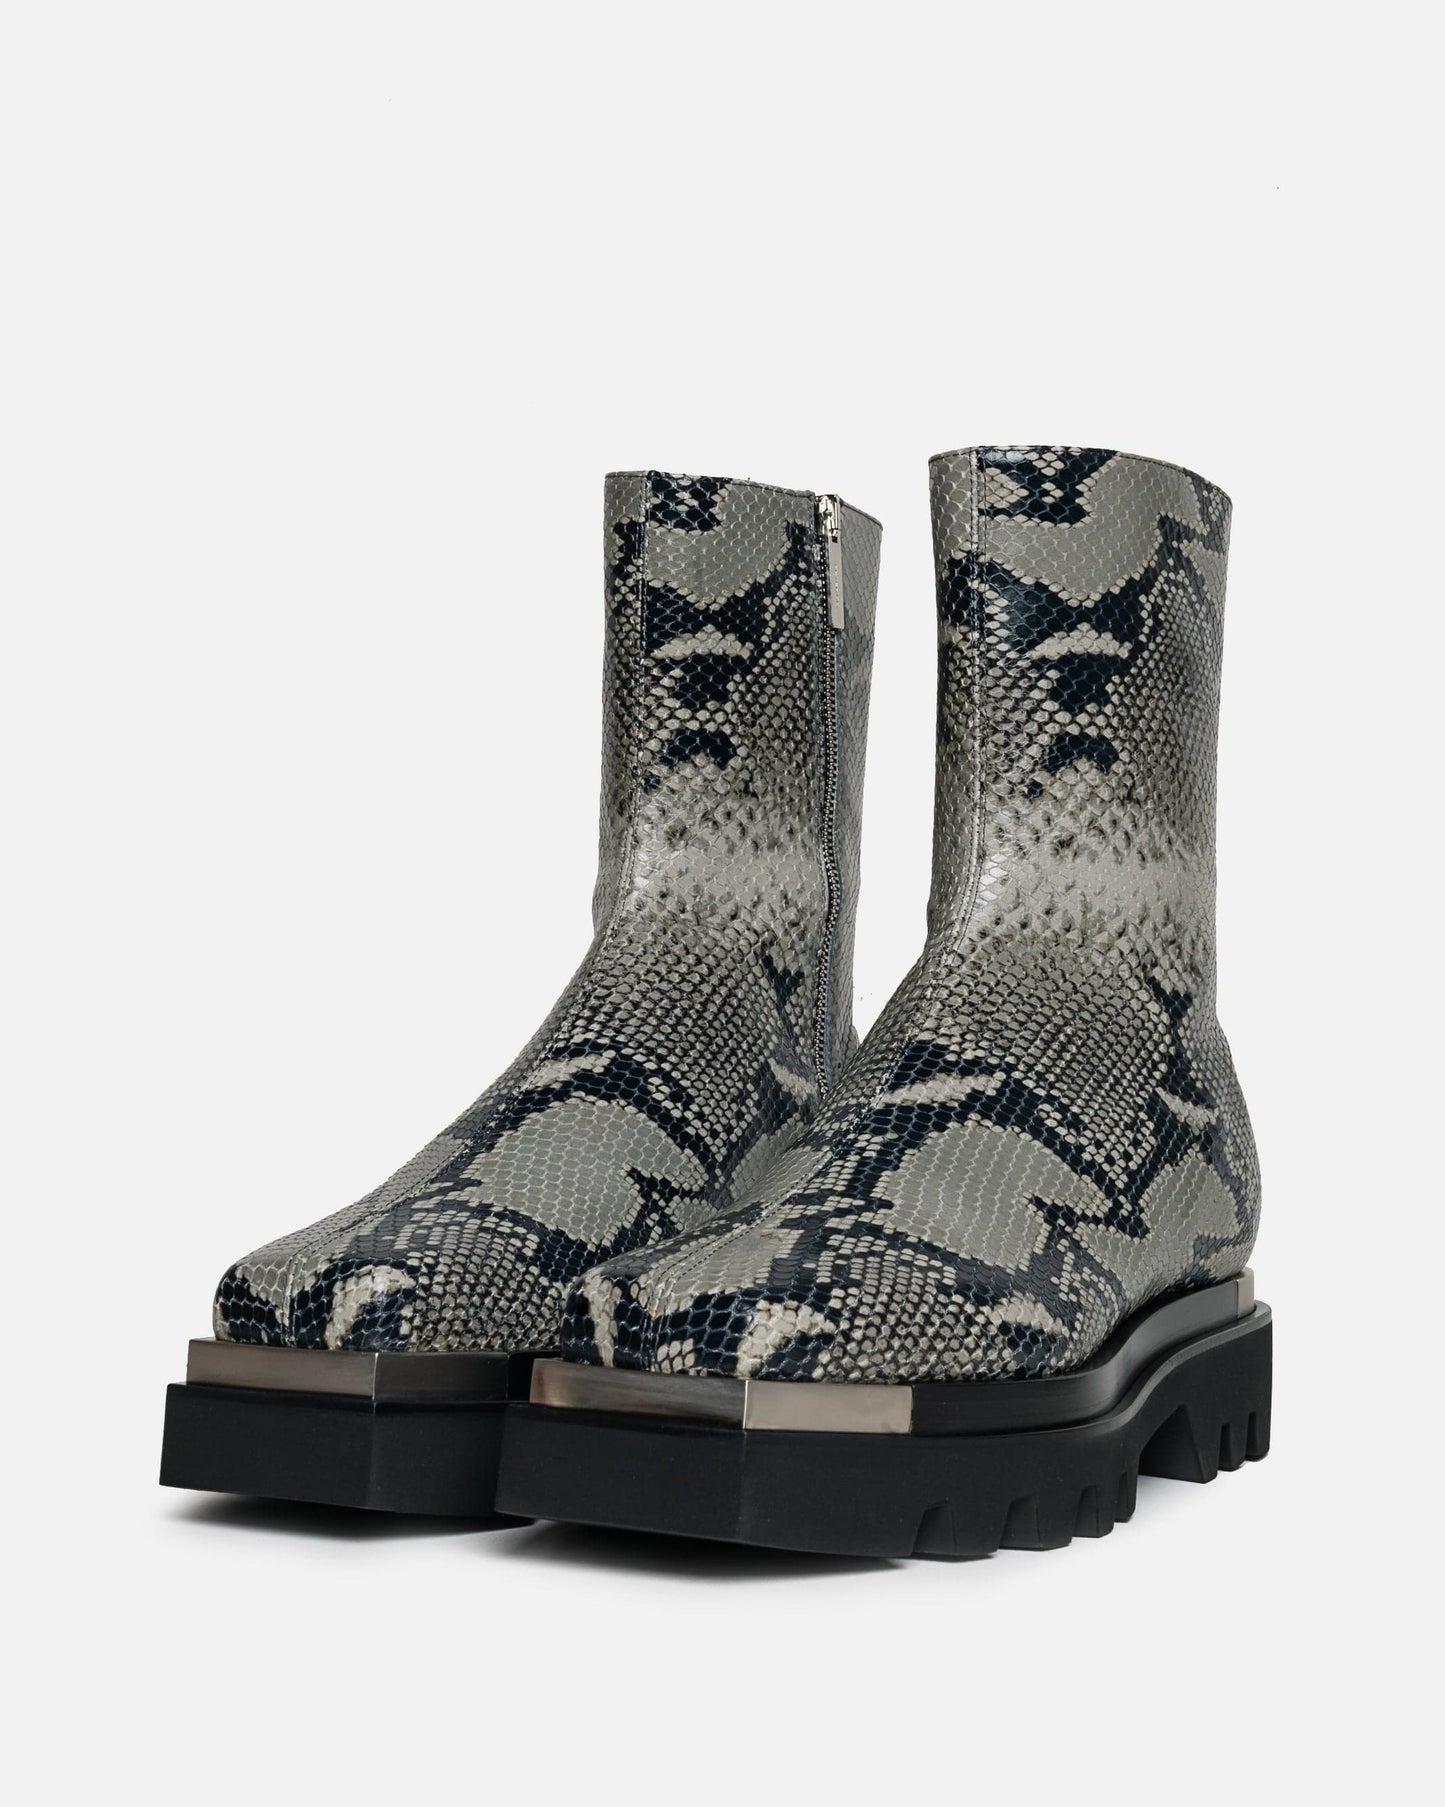 Peter Do Men's Boots Combat Boot in Cool Grey Python